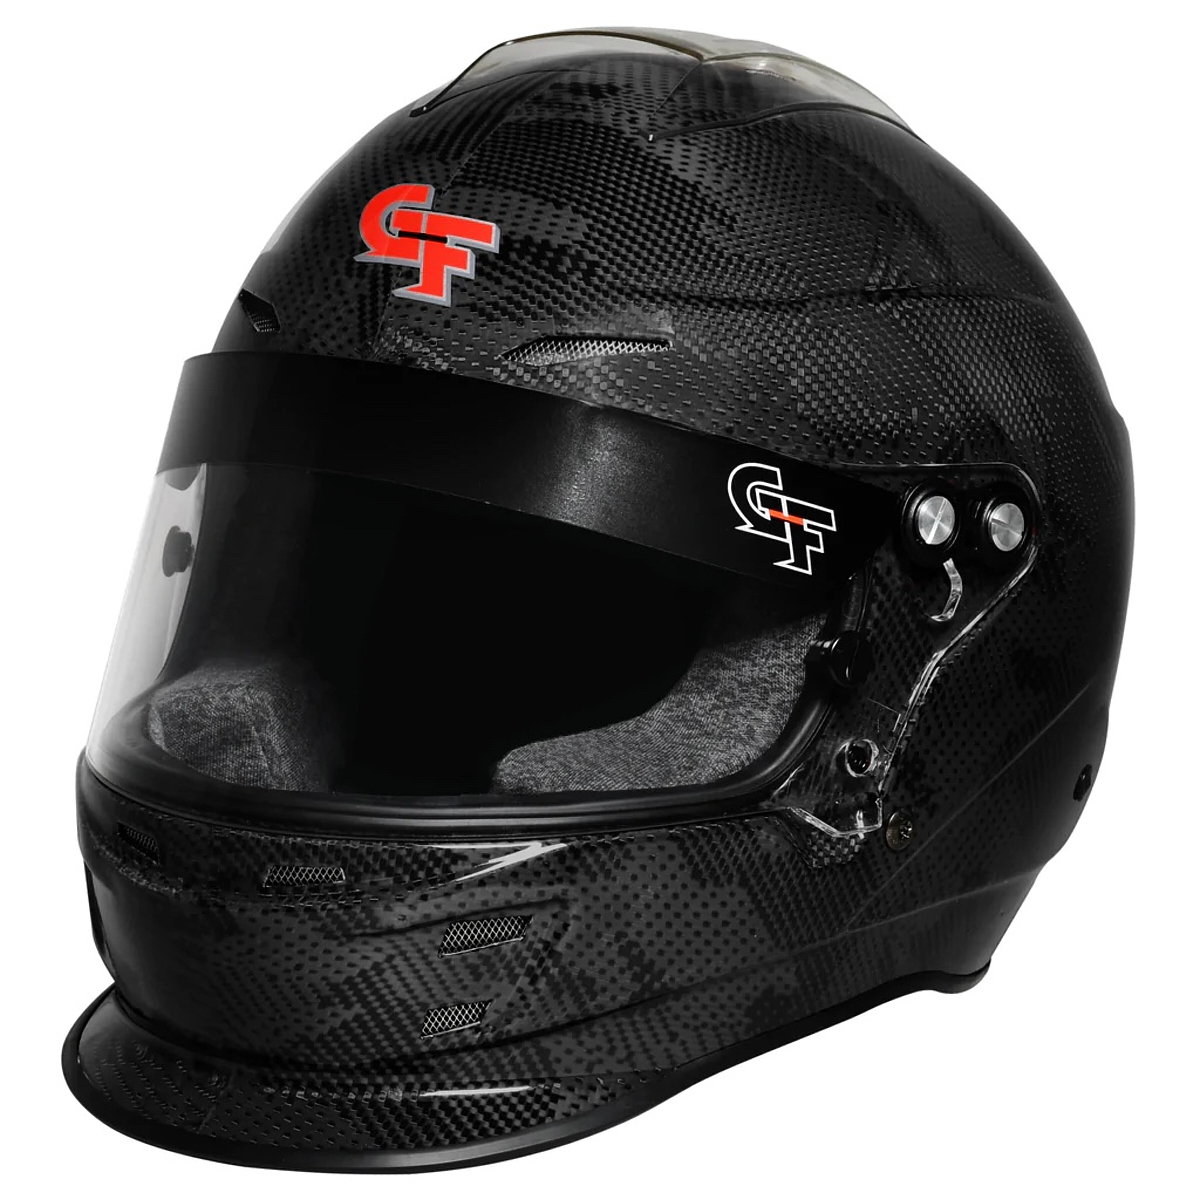 G-Force Racing Gear 16005SMLBK Helmet, Nova Fusion, Full Face, Snell SA 2020, Head and Neck Support Ready, Black, Small, Each